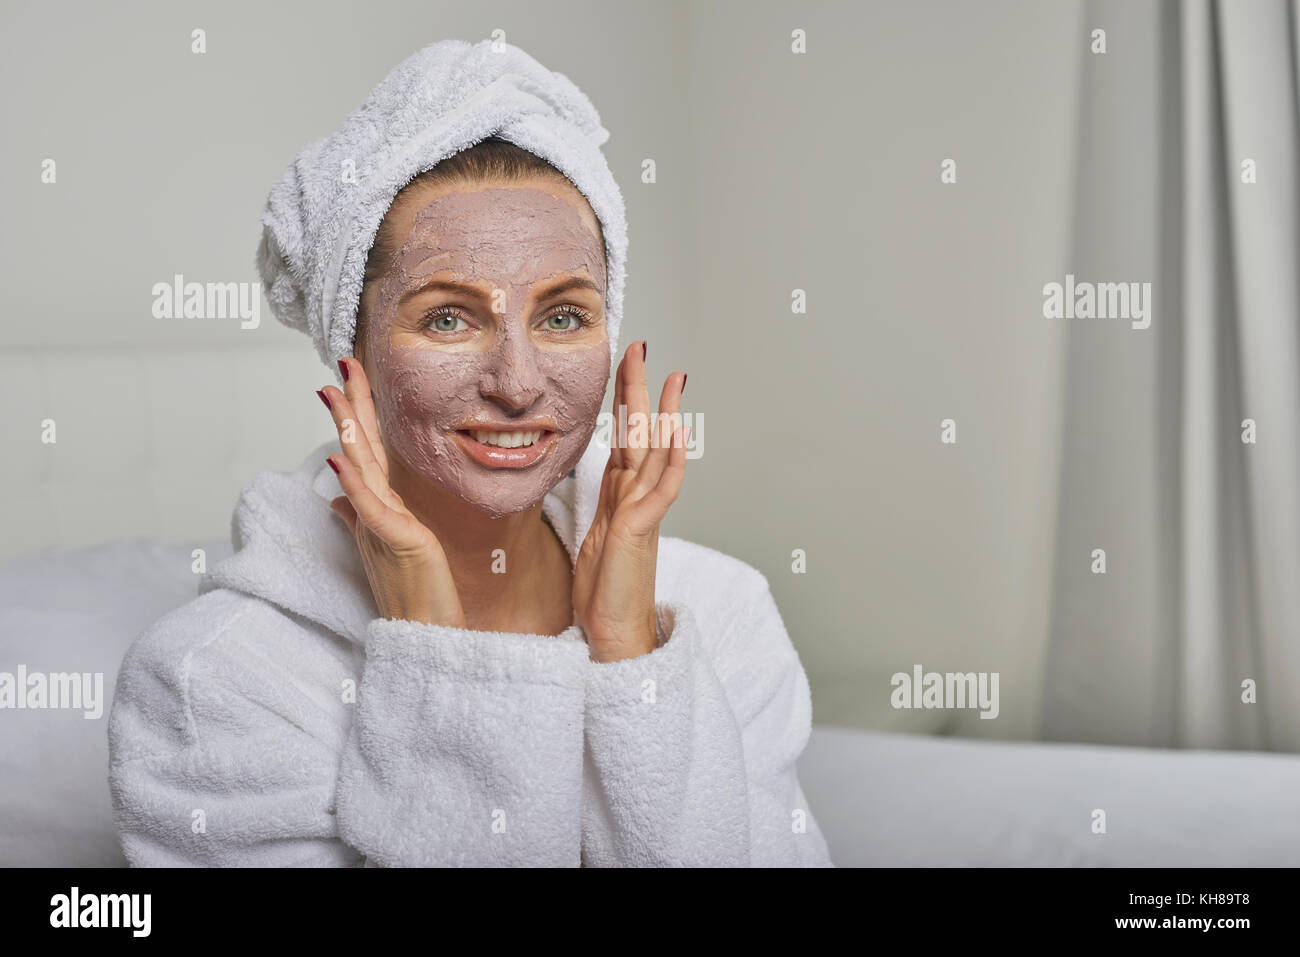 Woman at a spa having a face mask beauty treatment wearing white towelling robe and headdress smiling at the camera Stock Photo